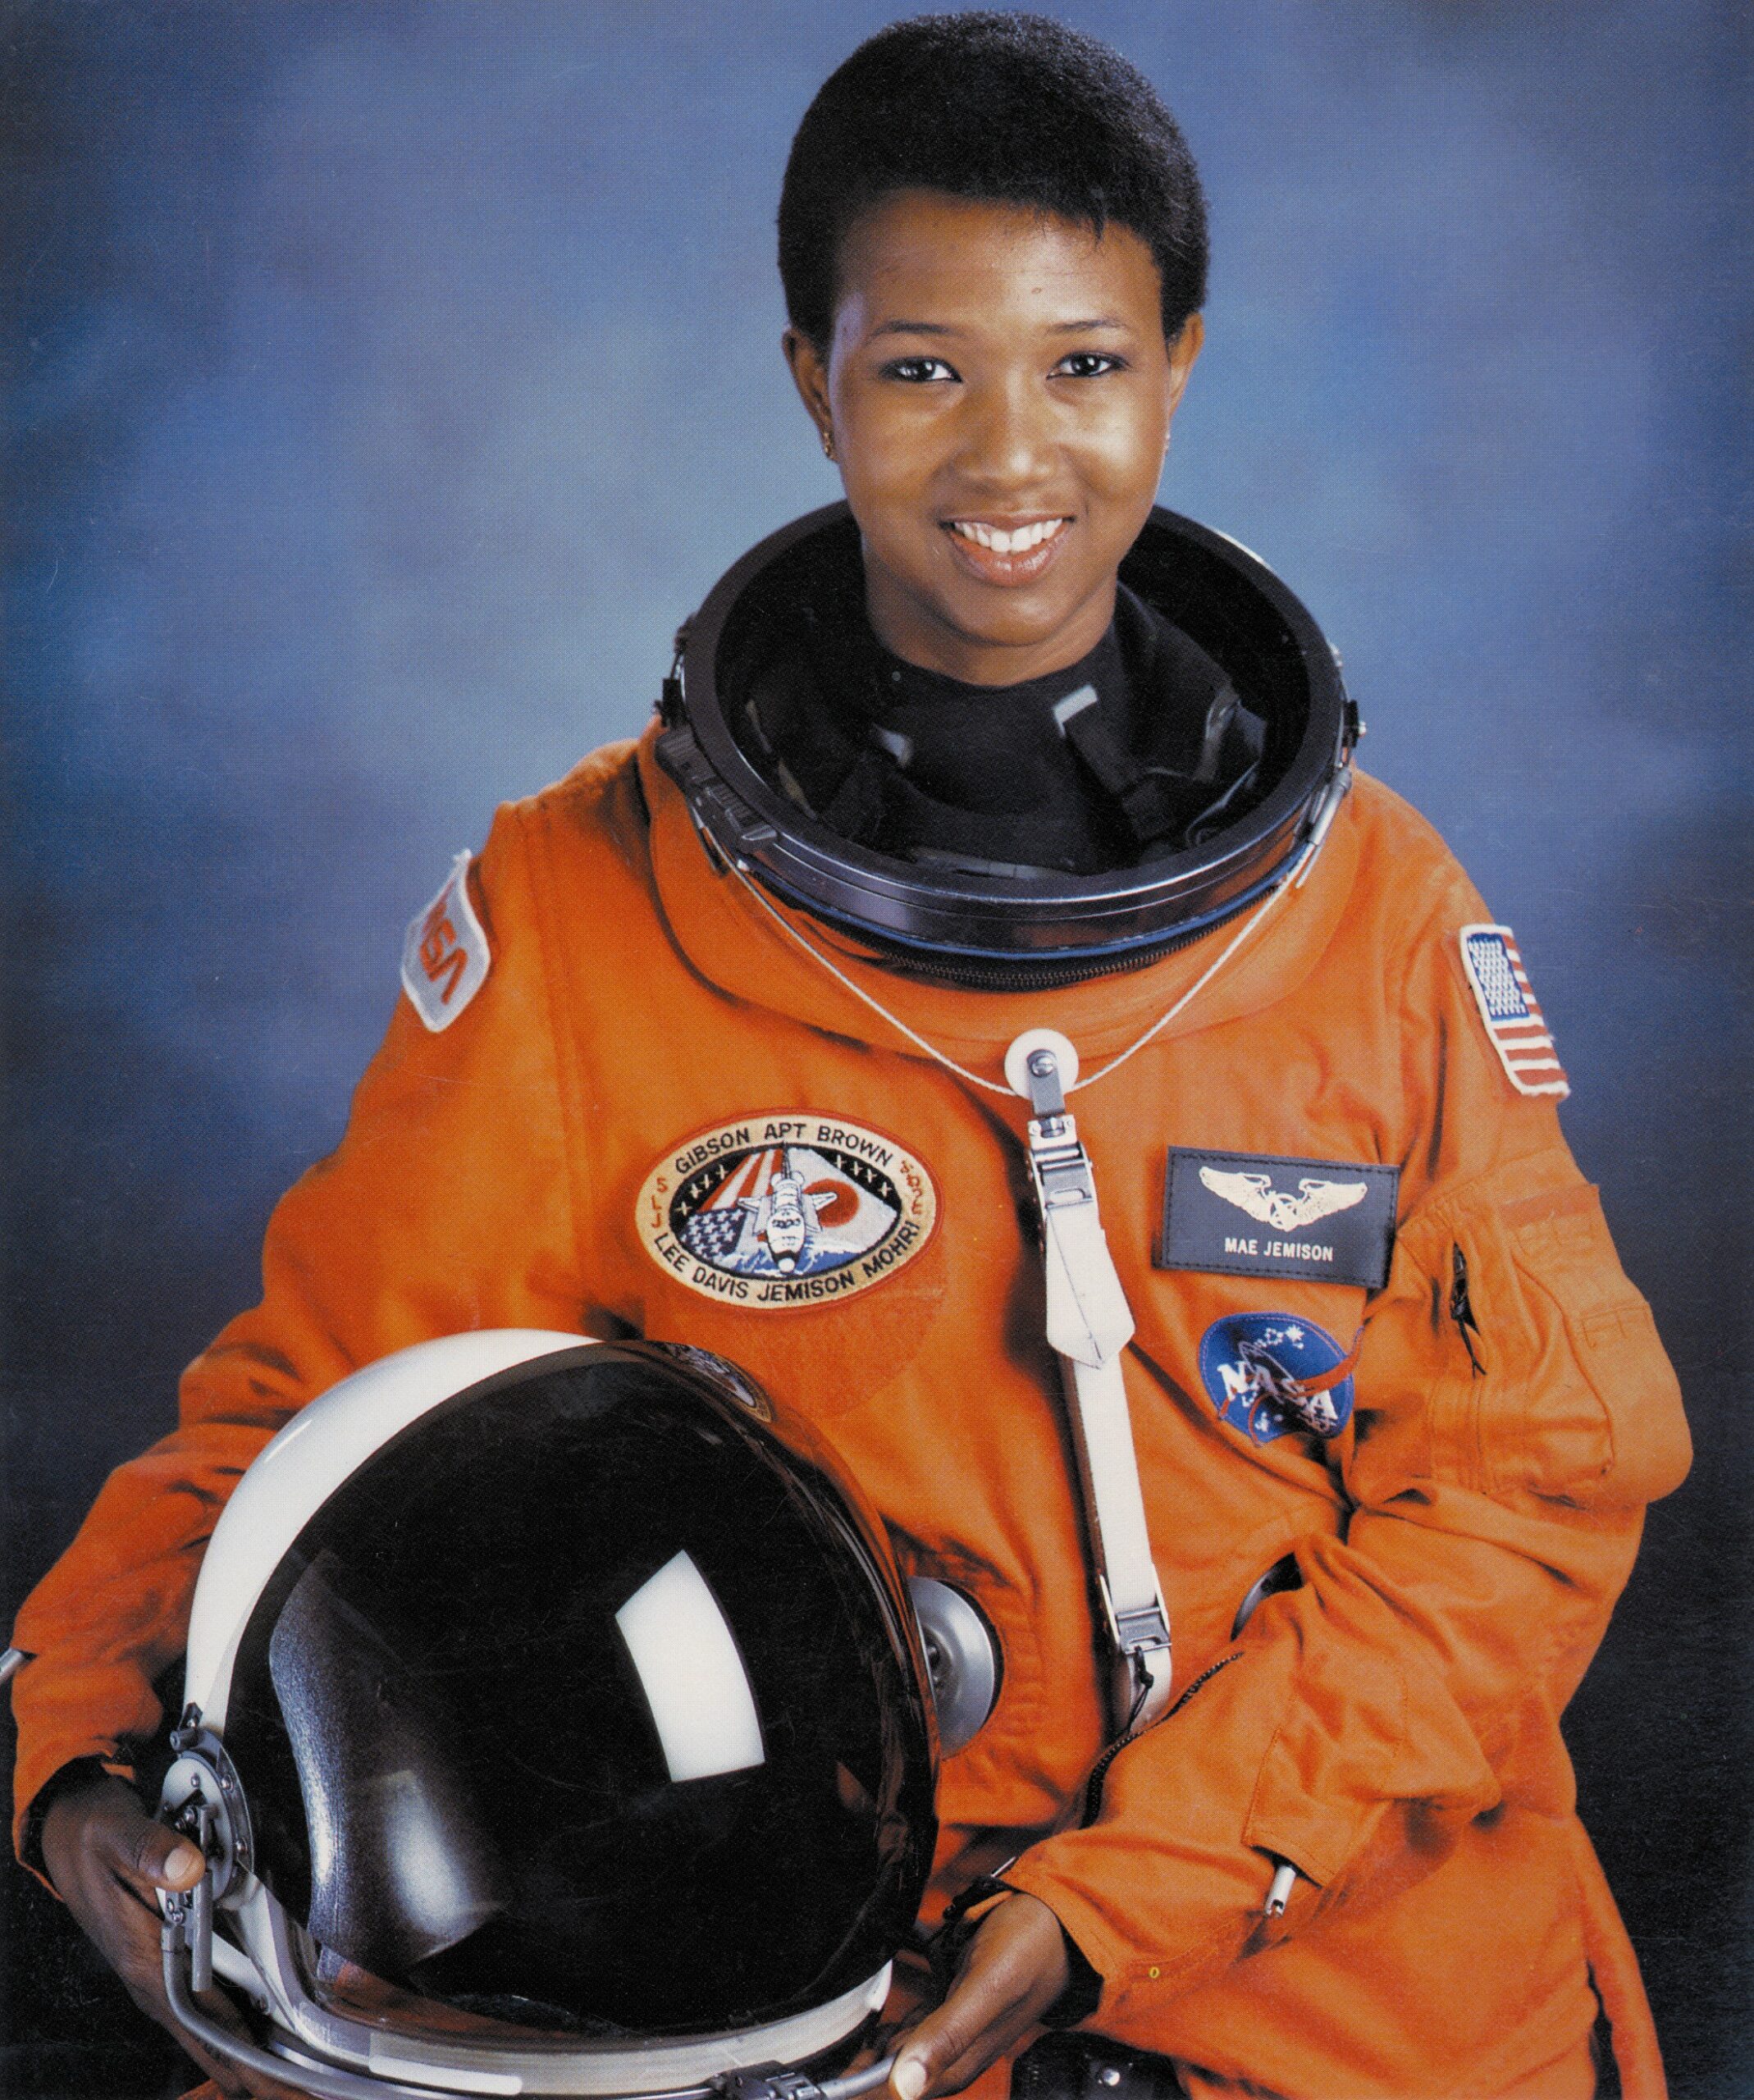 Mae Jemison, Who Was the First Black Woman in Space, Will Now Lead 100-Year Starship Project